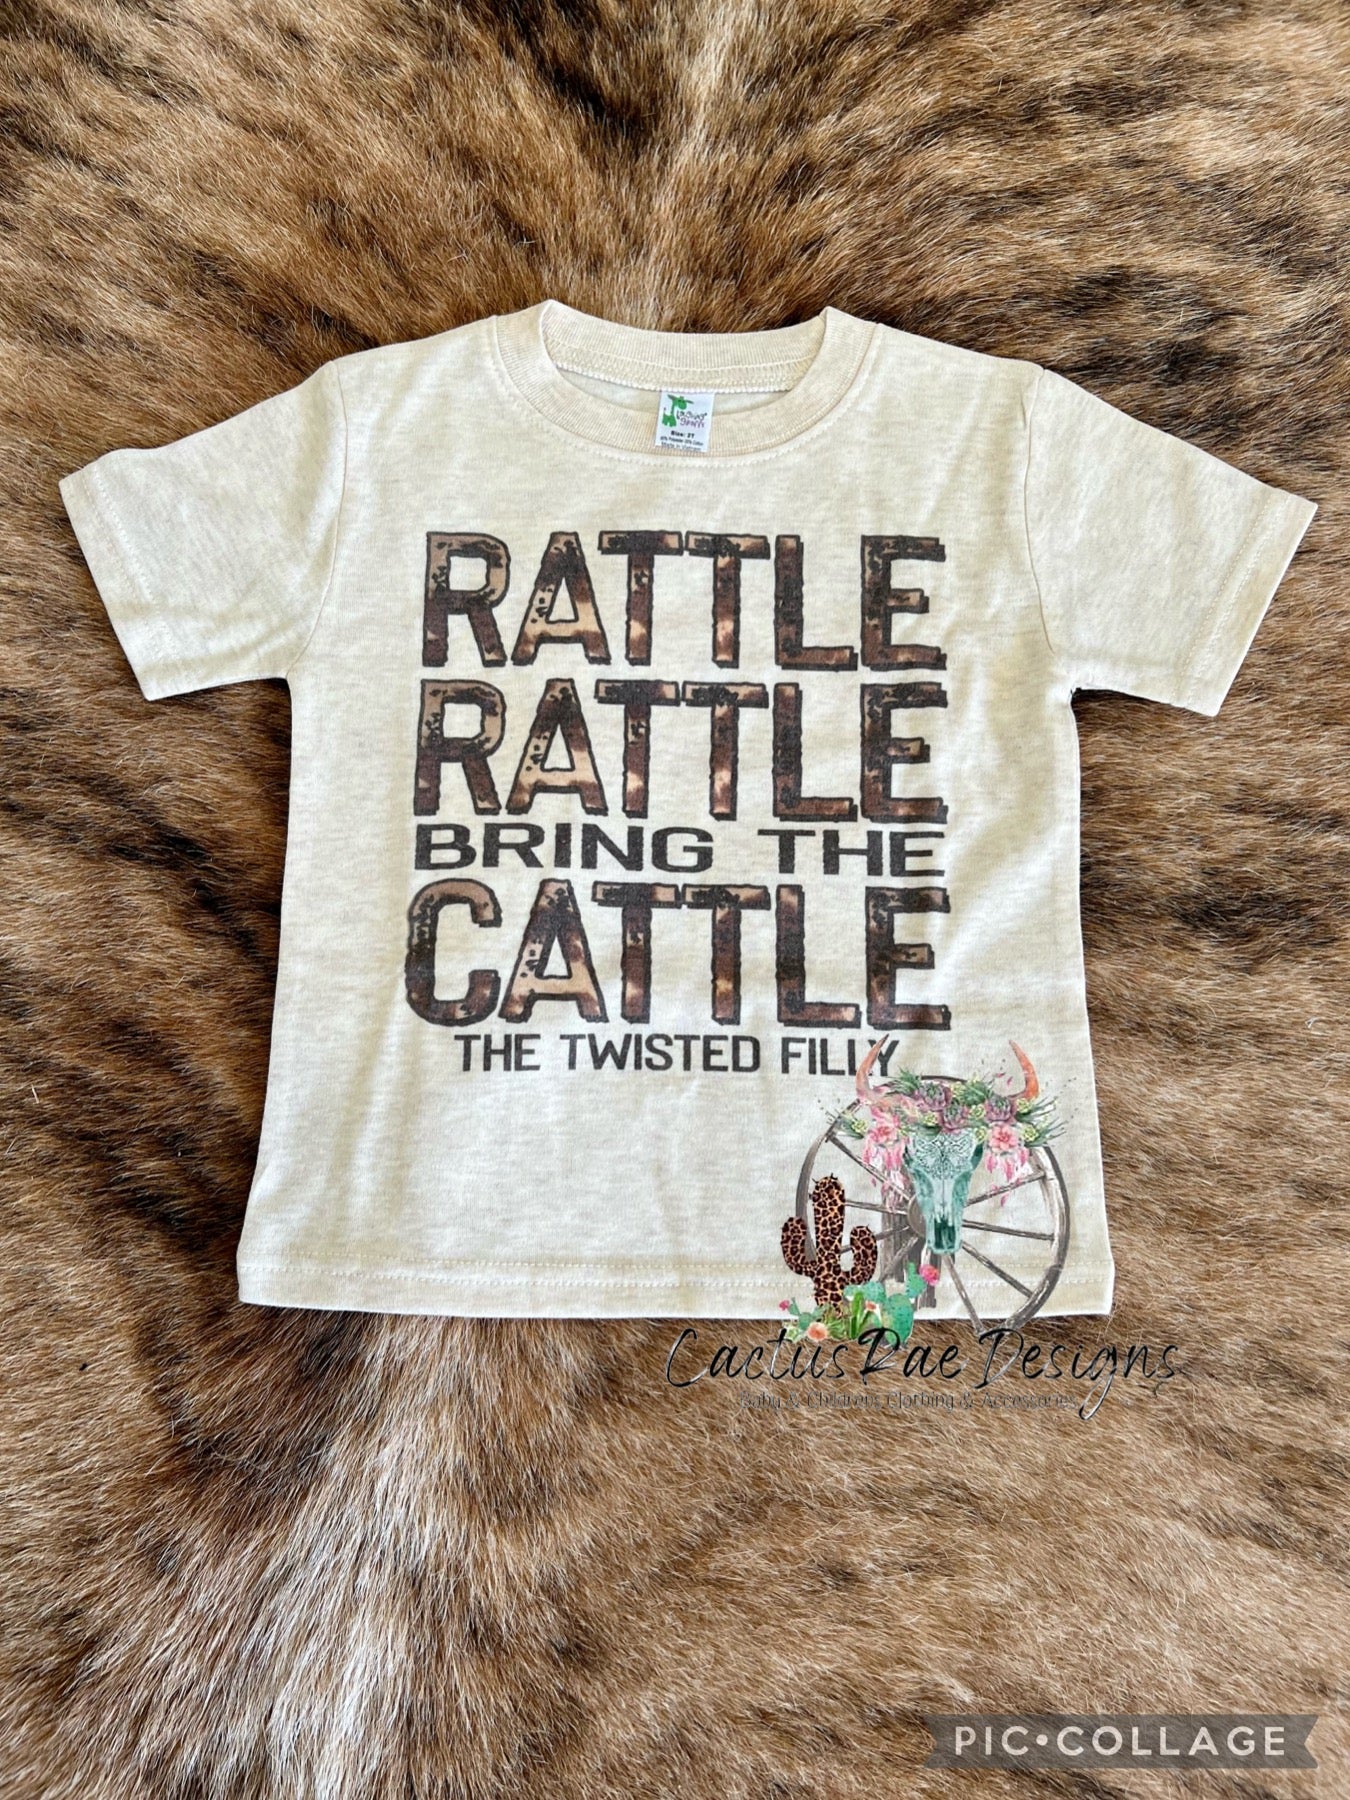 Rattle Rattle Bring the Cattle Tee